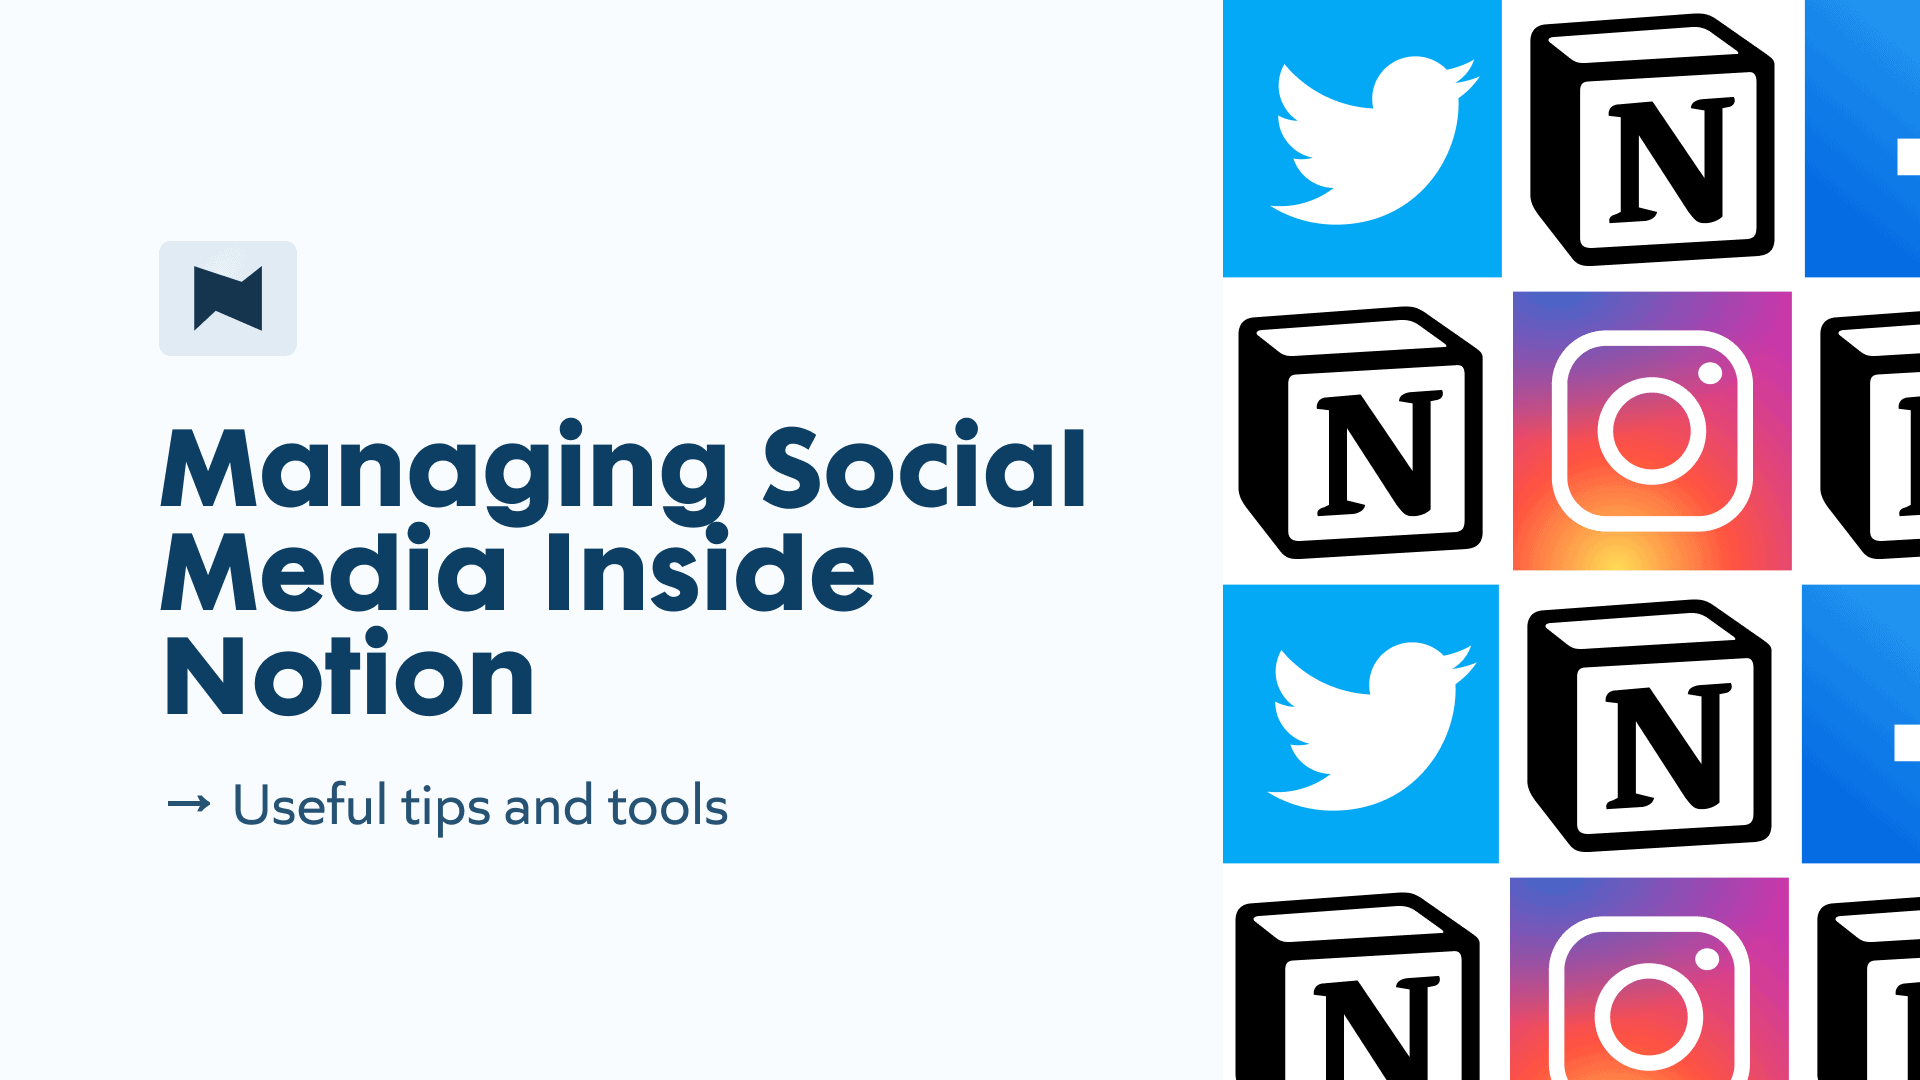 How to Use Notion to Manage Your Social Media Content ⭐ (Like a Pro!)